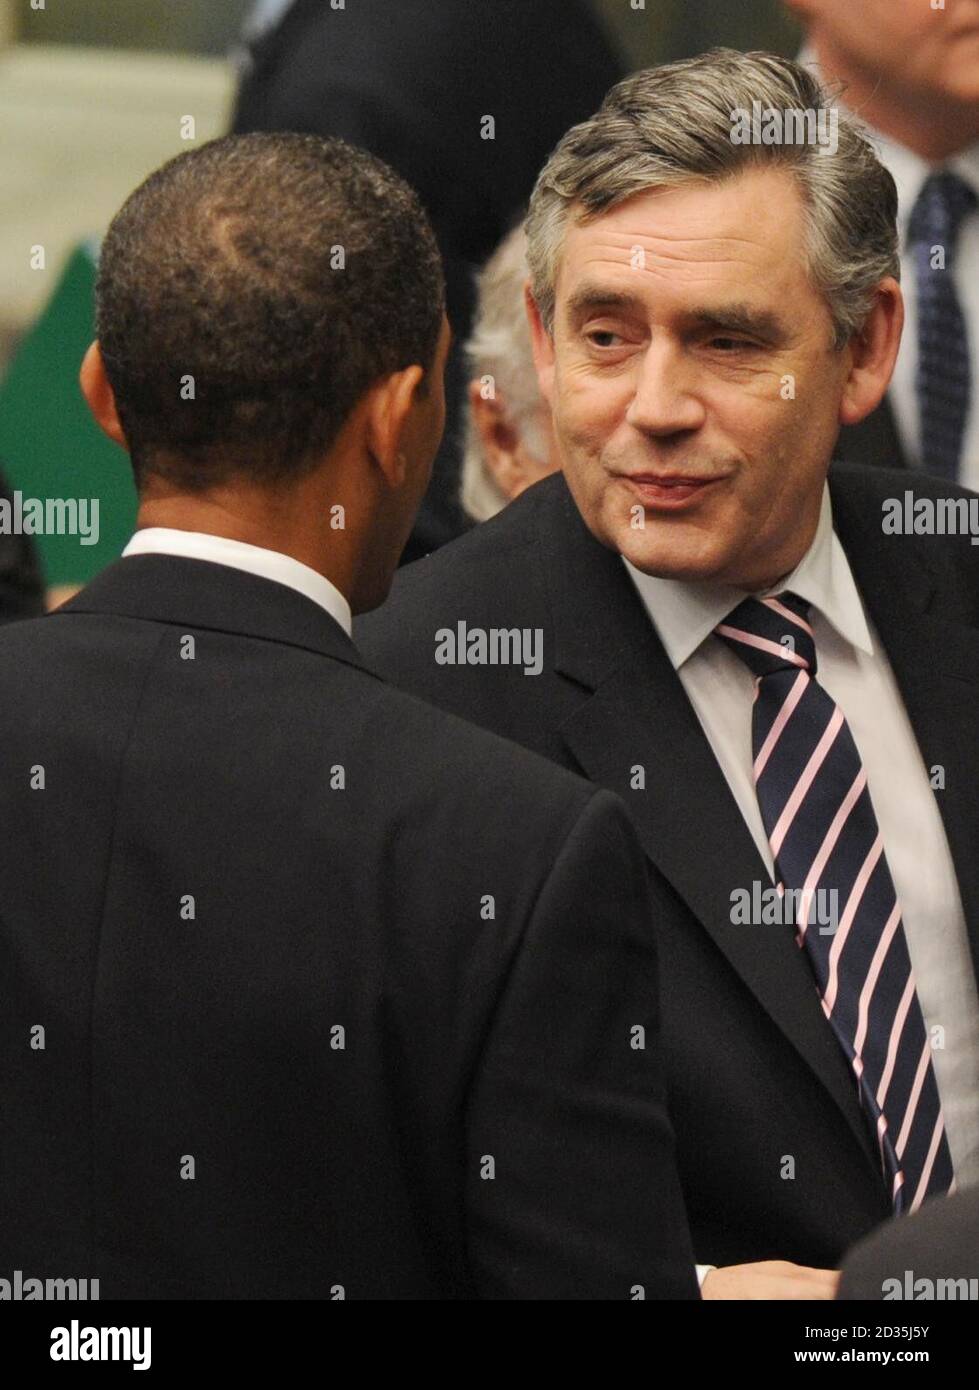 US President Barack Obama and Britain's Prime Minister Gordon Brown leave the UN Security Council in New York. Stock Photo